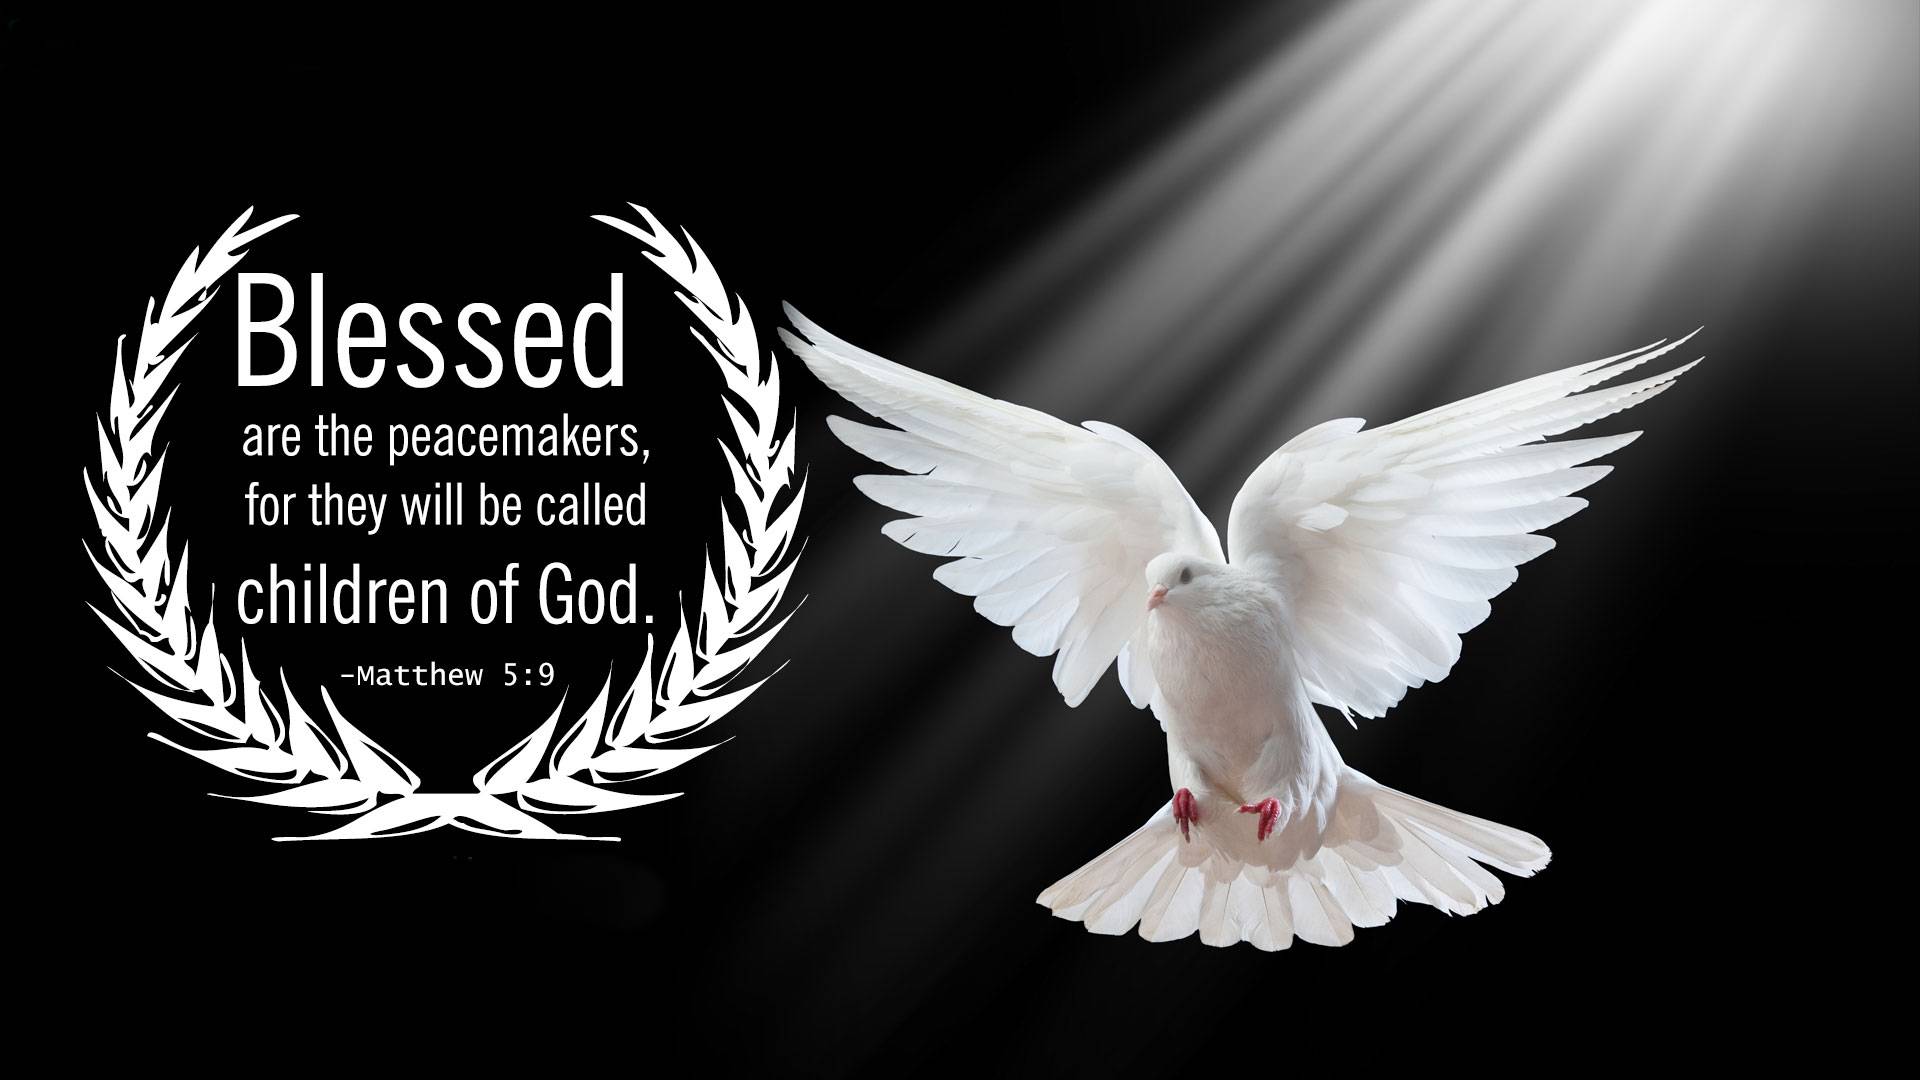 Jesus said "Blessed are the Peacemakers" and He meant It